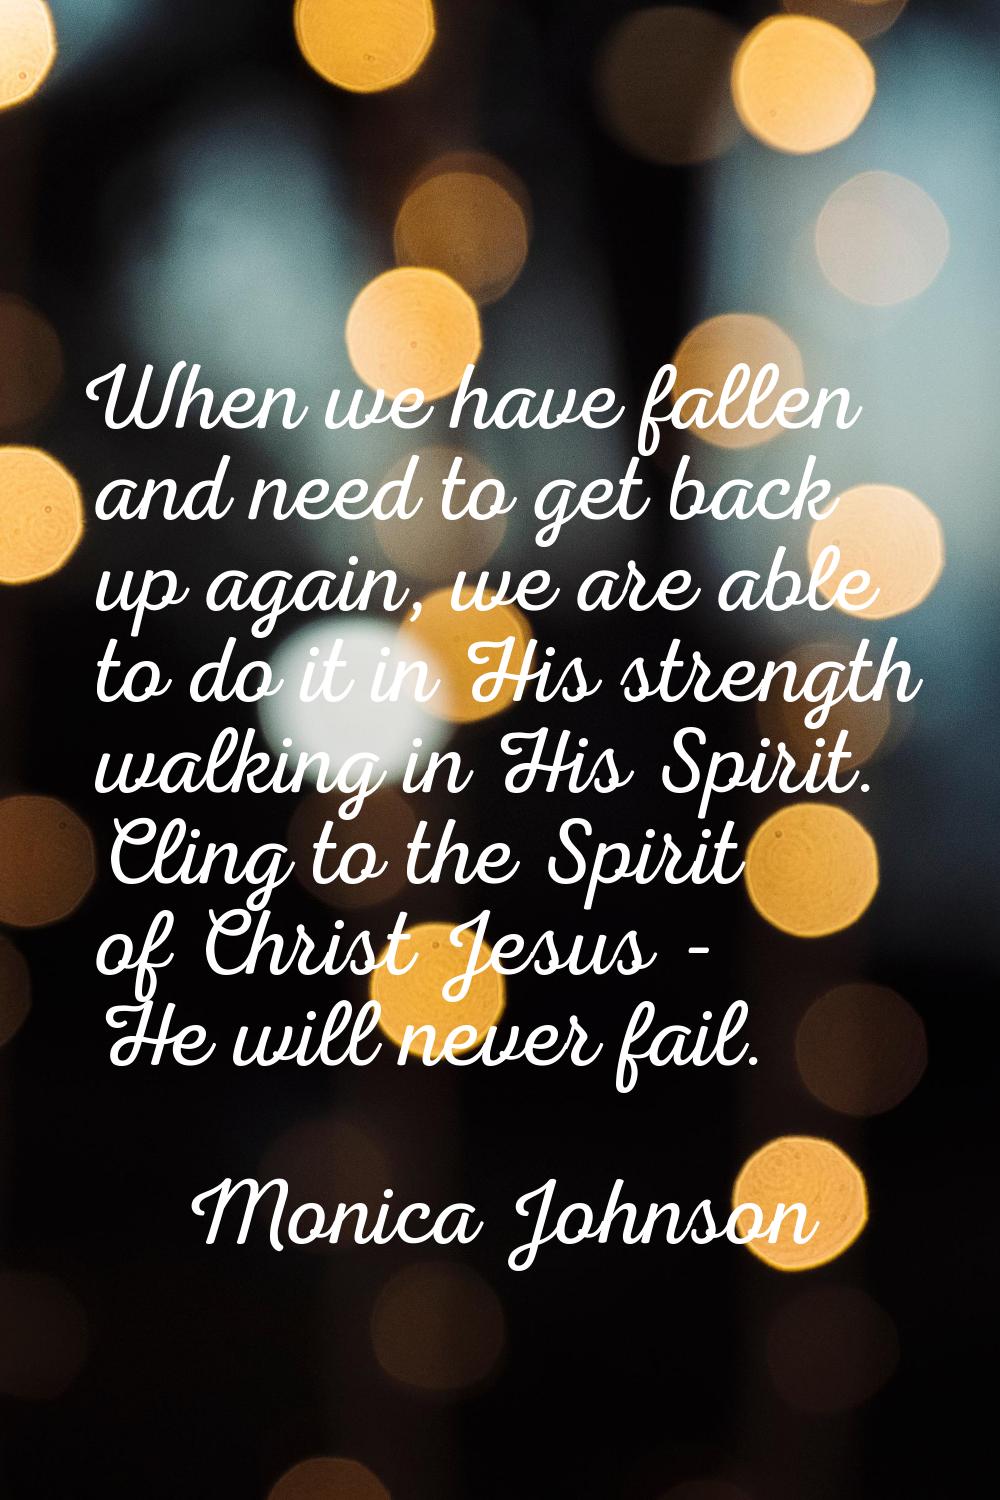 When we have fallen and need to get back up again, we are able to do it in His strength walking in 